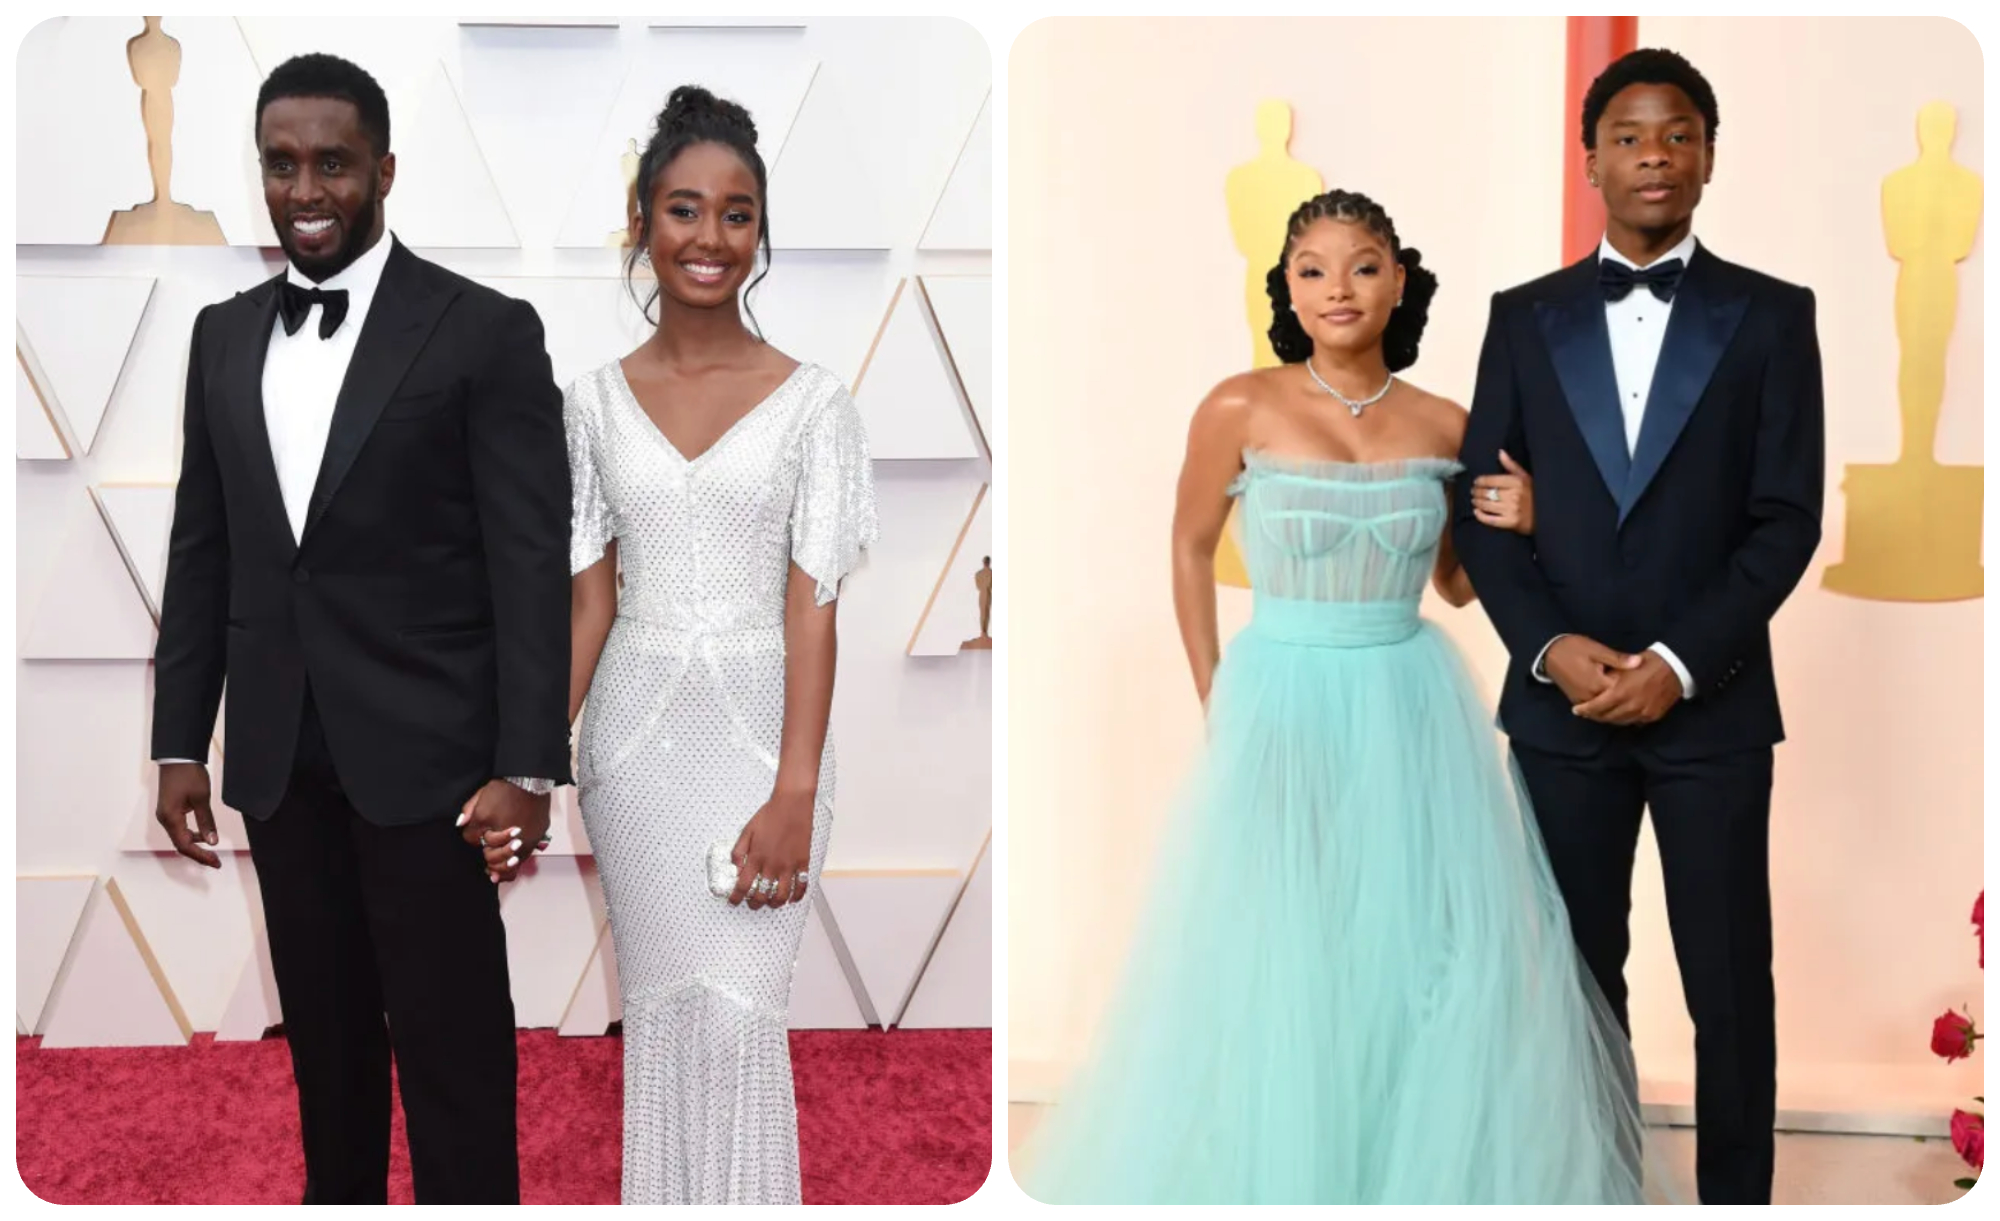 Prom Preciousness! Chloe & Halle Bailey’s Brother Branson Takes Diddy’s Daughter Chance To Prom